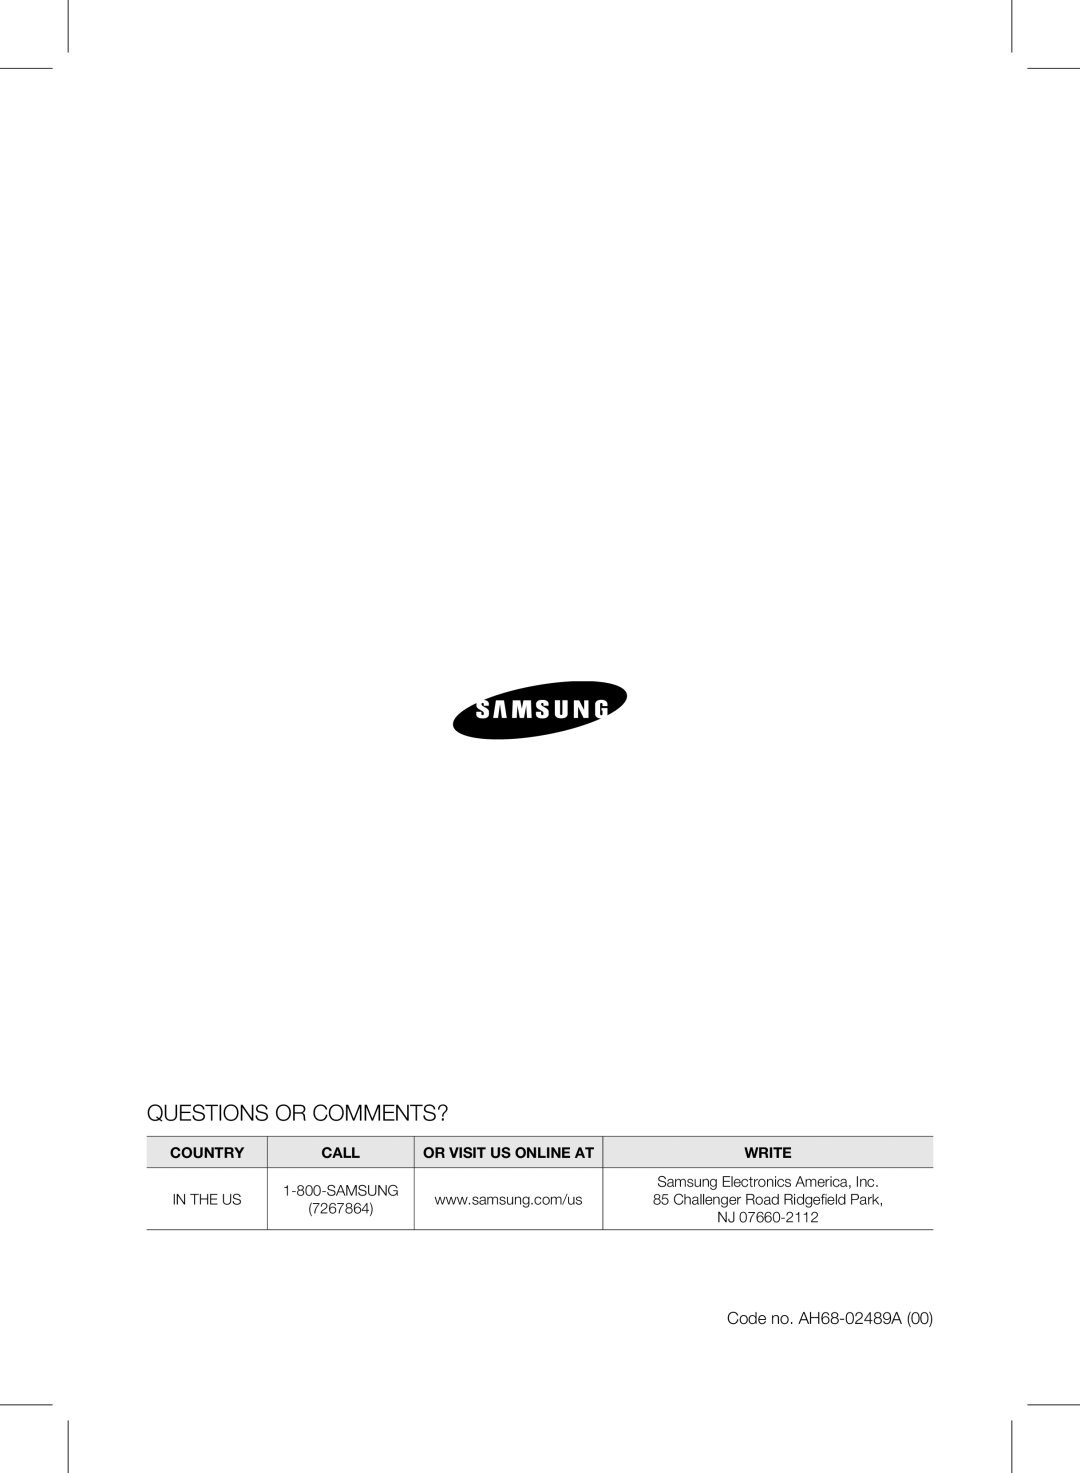 Samsung HW-E450C user manual Questions Or Comments?, Country, Call, Or Visit Us Online At, Write, In The Us, 7267864 